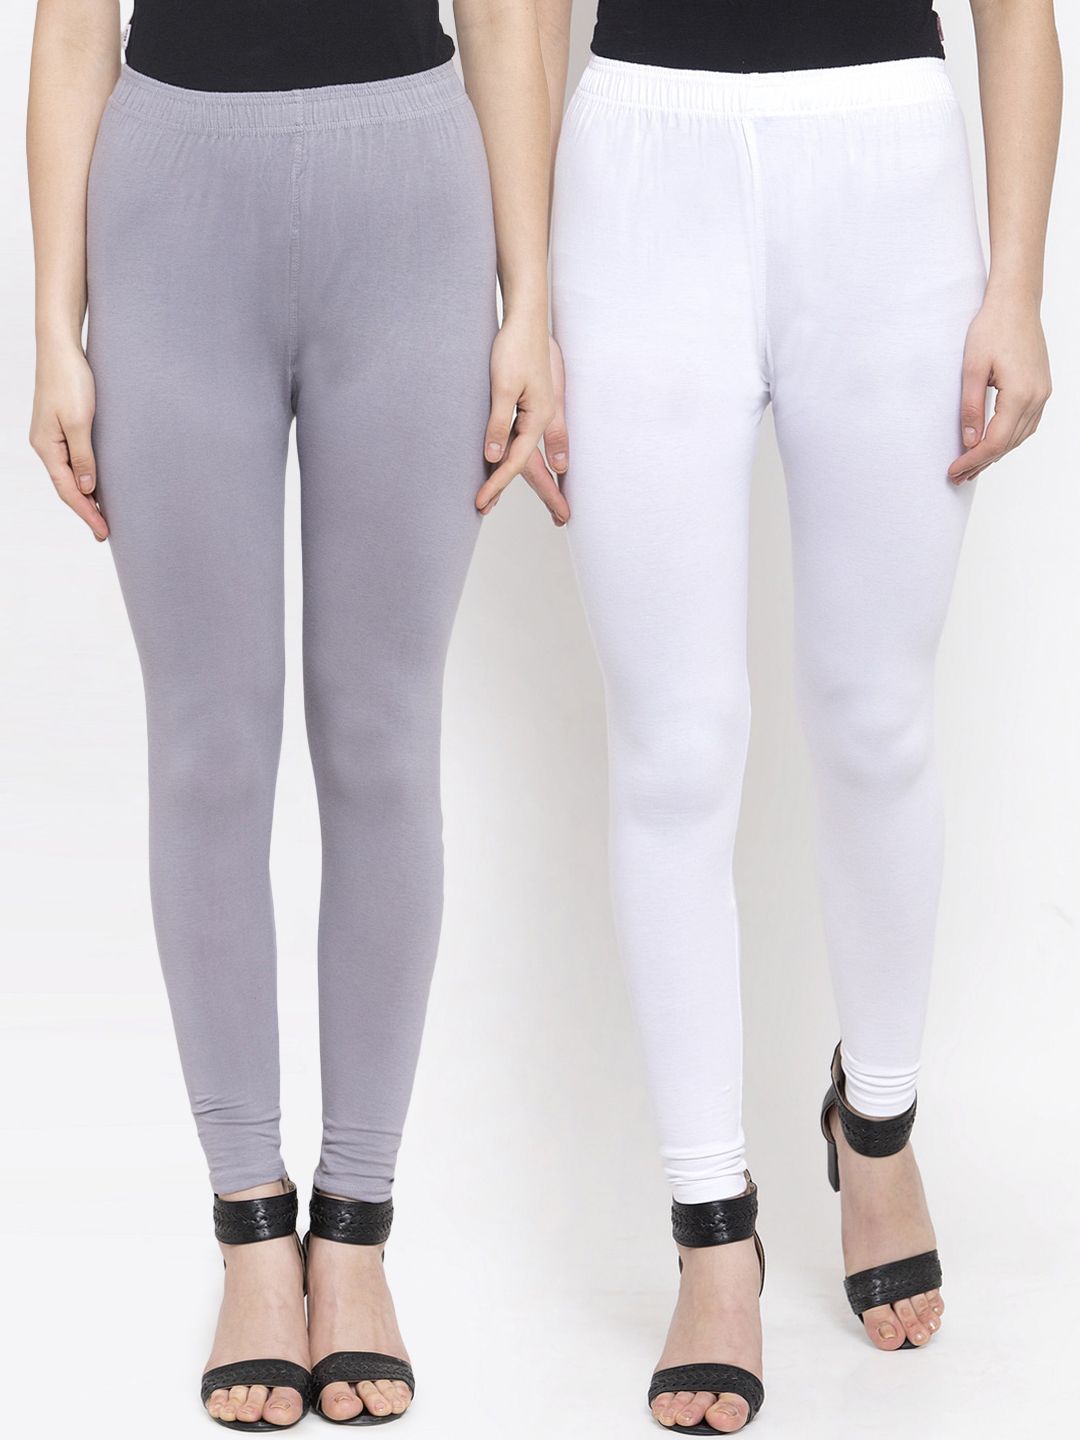 TAG 7 Women Pack of 2 Solid Ankle-Length Leggings Price in India